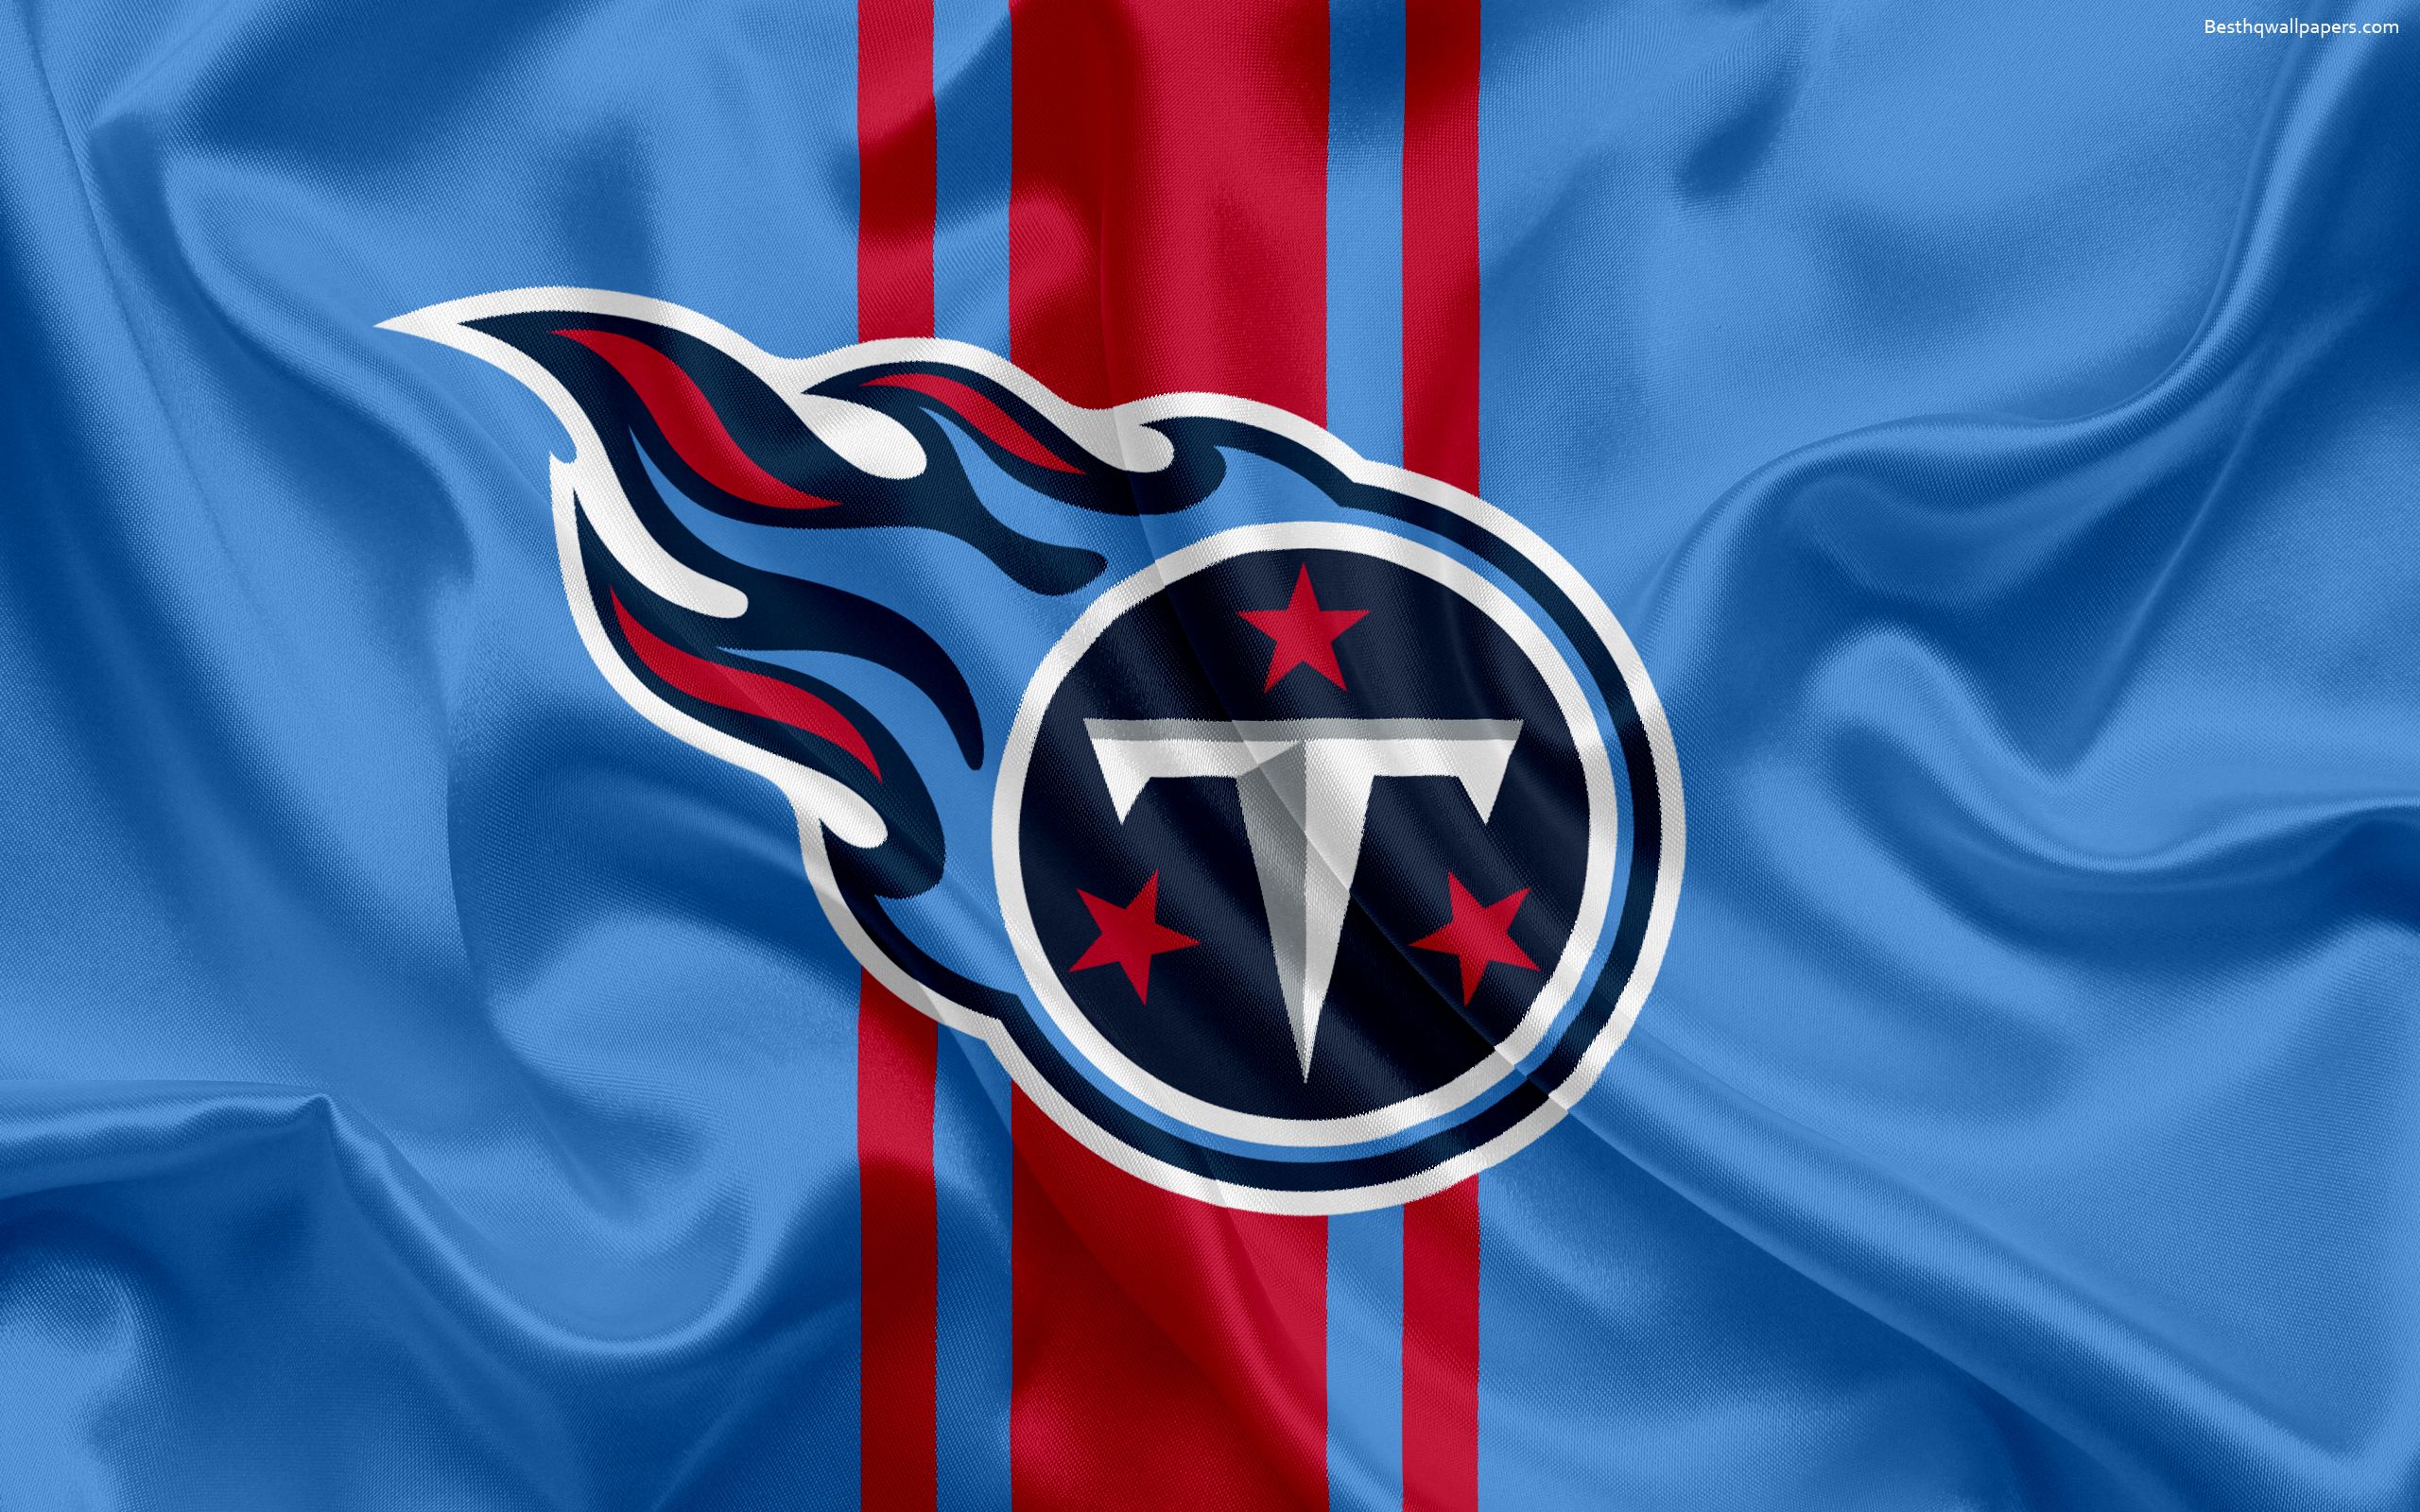 Download wallpaper Tennessee Titans, American football, logo, emblem, National Football League, NFL, Nashville, Tennessee, USA for desktop with resolution 2560x1600. High Quality HD picture wallpaper